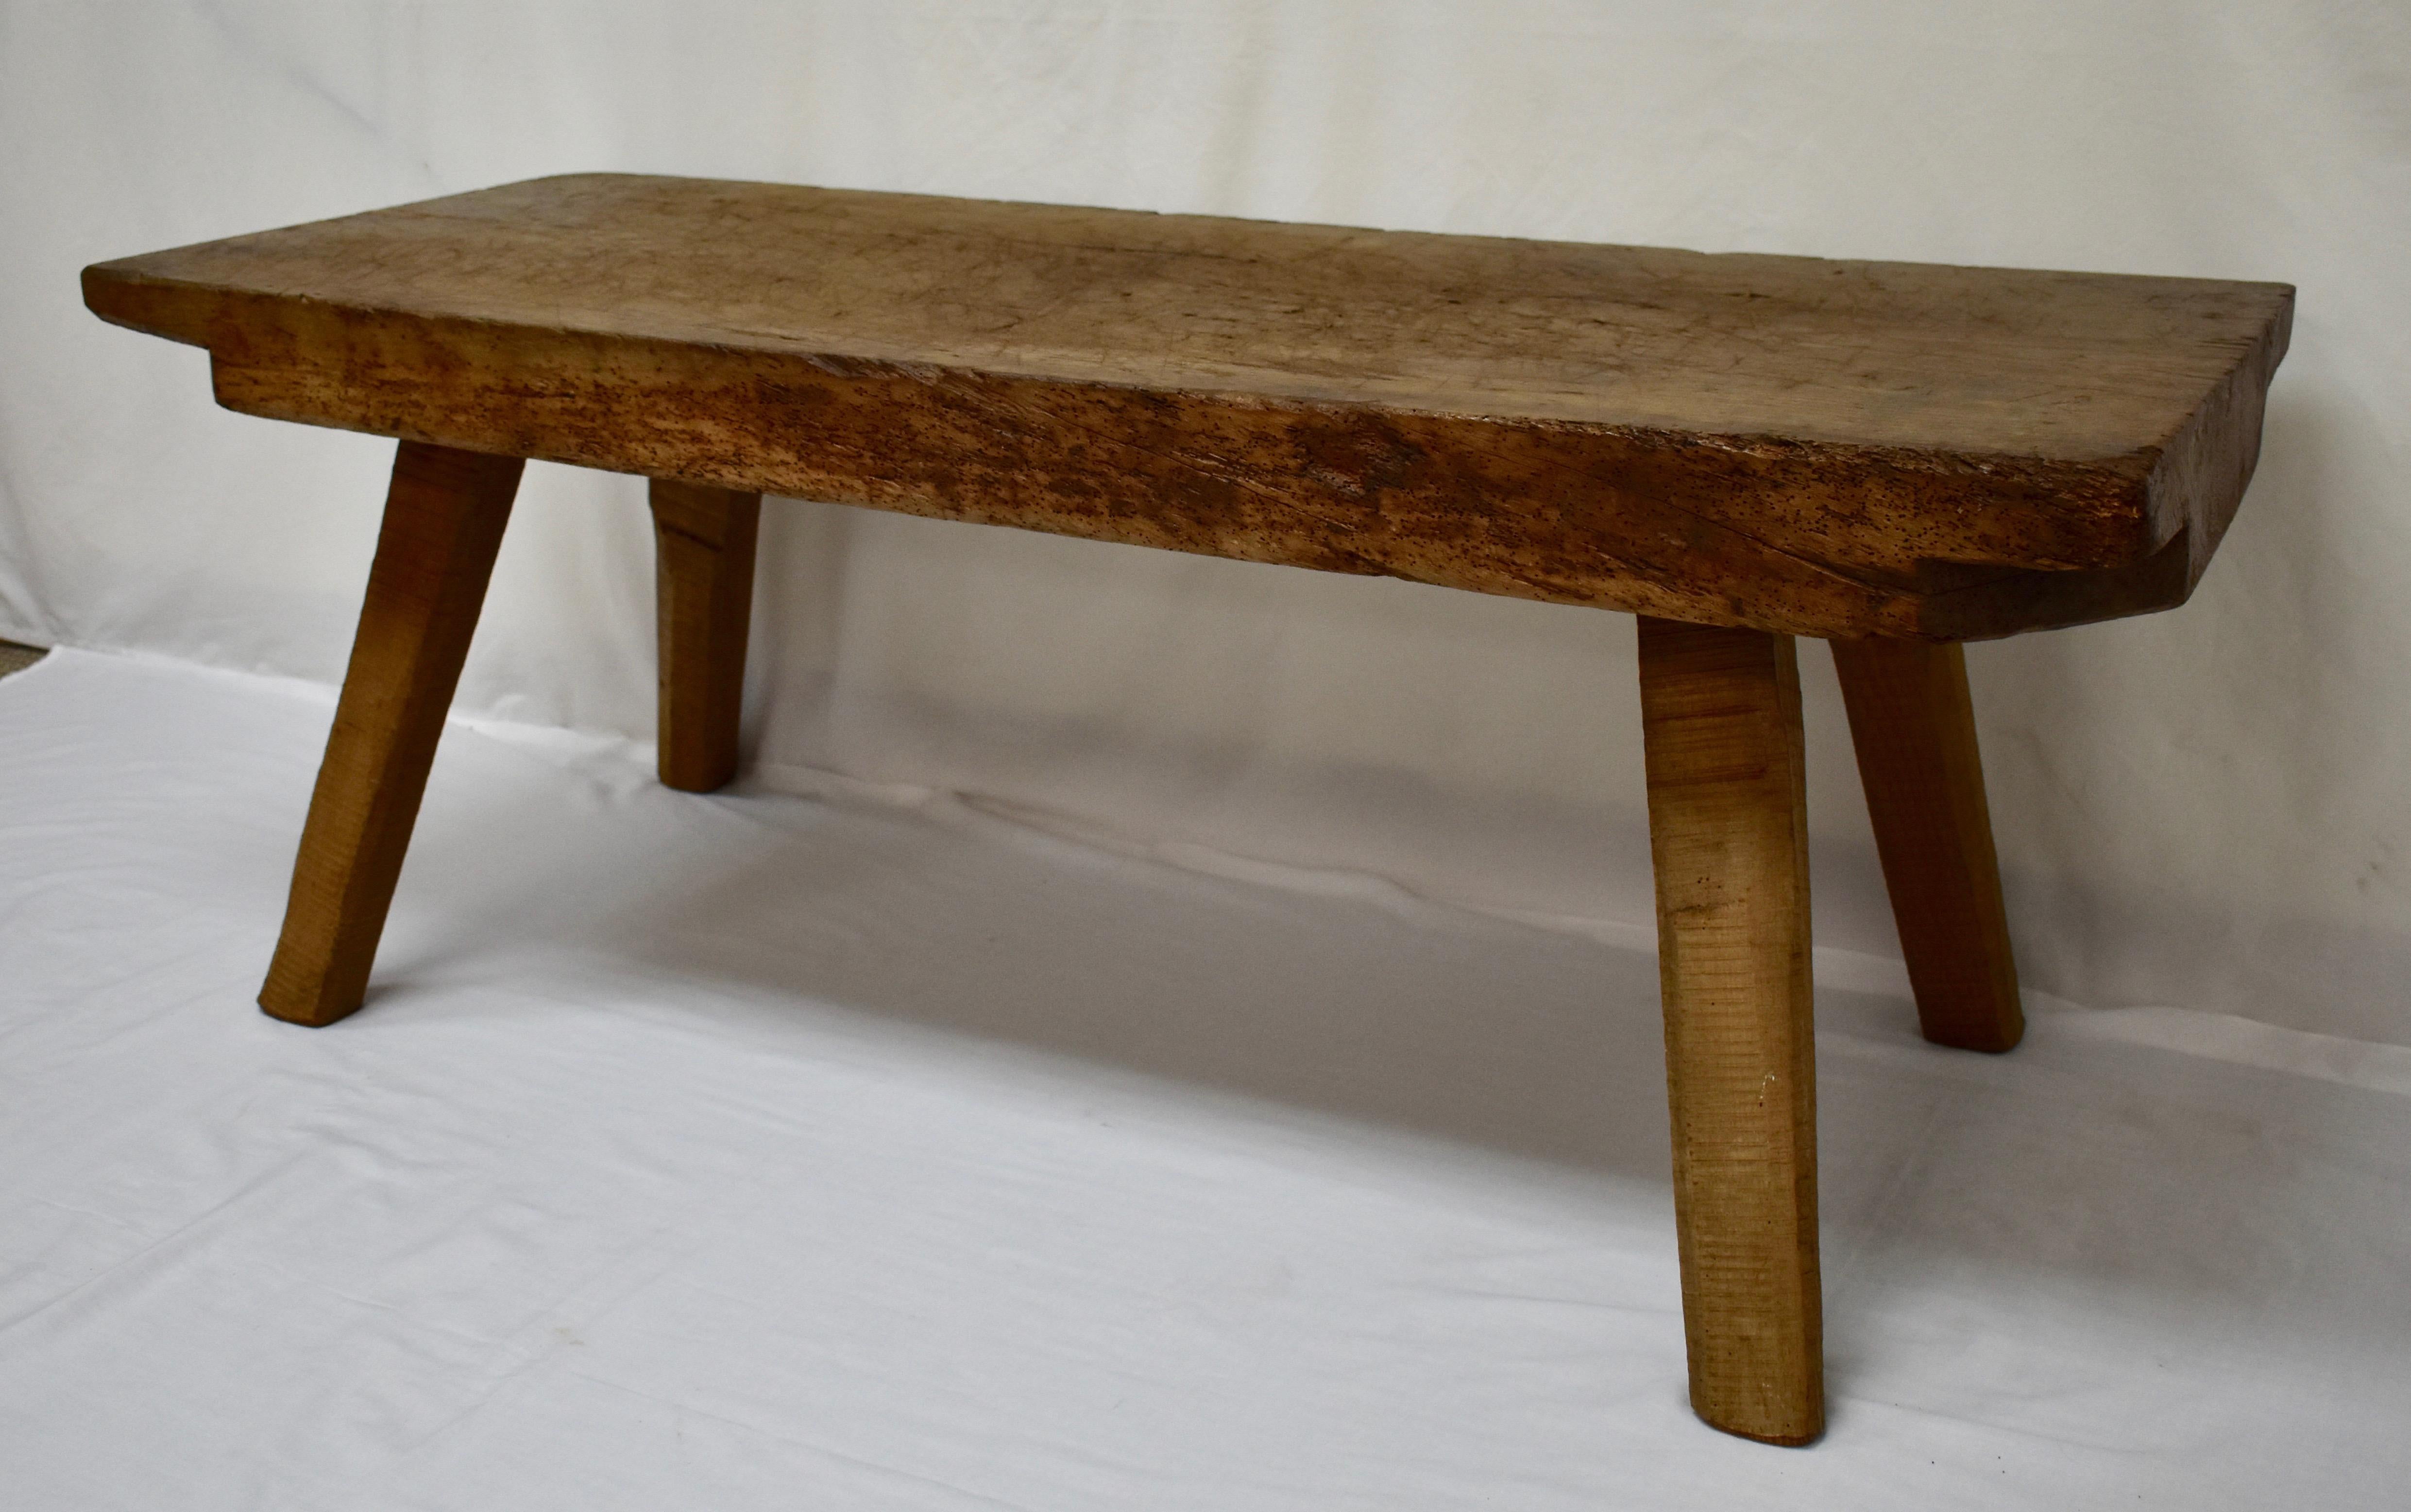 Polished Oak Pig Bench Coffee Table